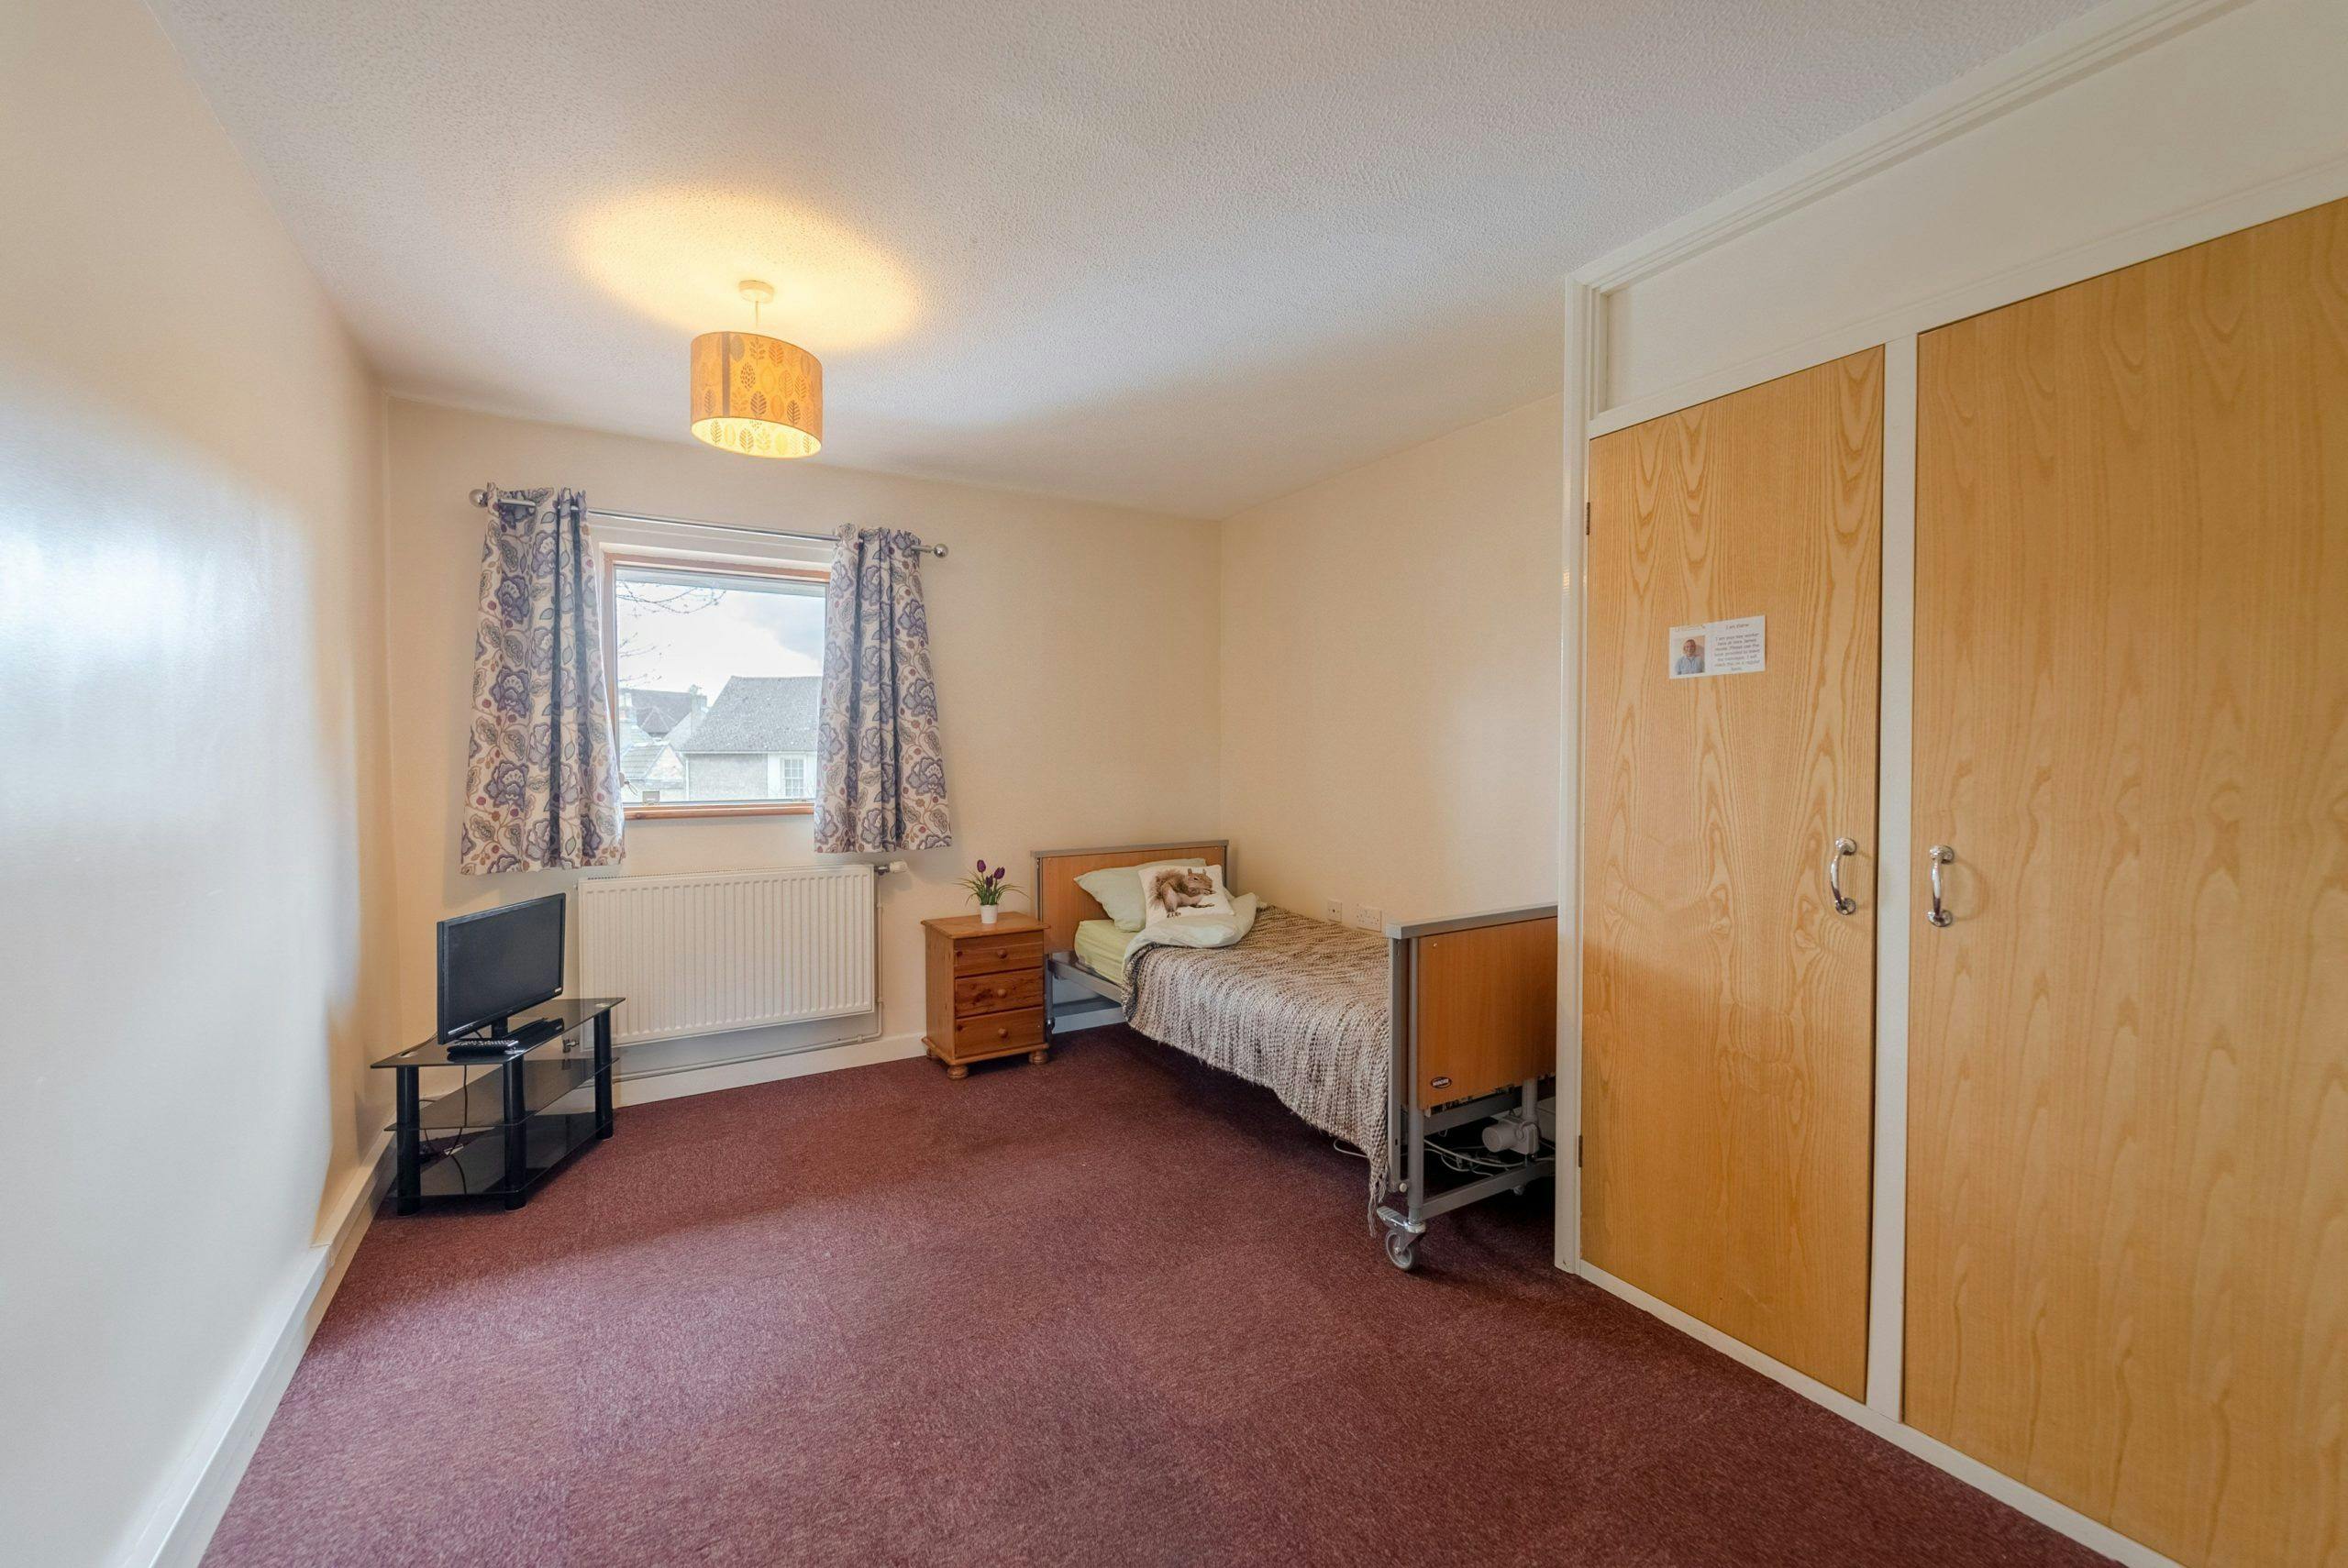 Bedroom of Vera James House care home in Ely, Cambridgeshire